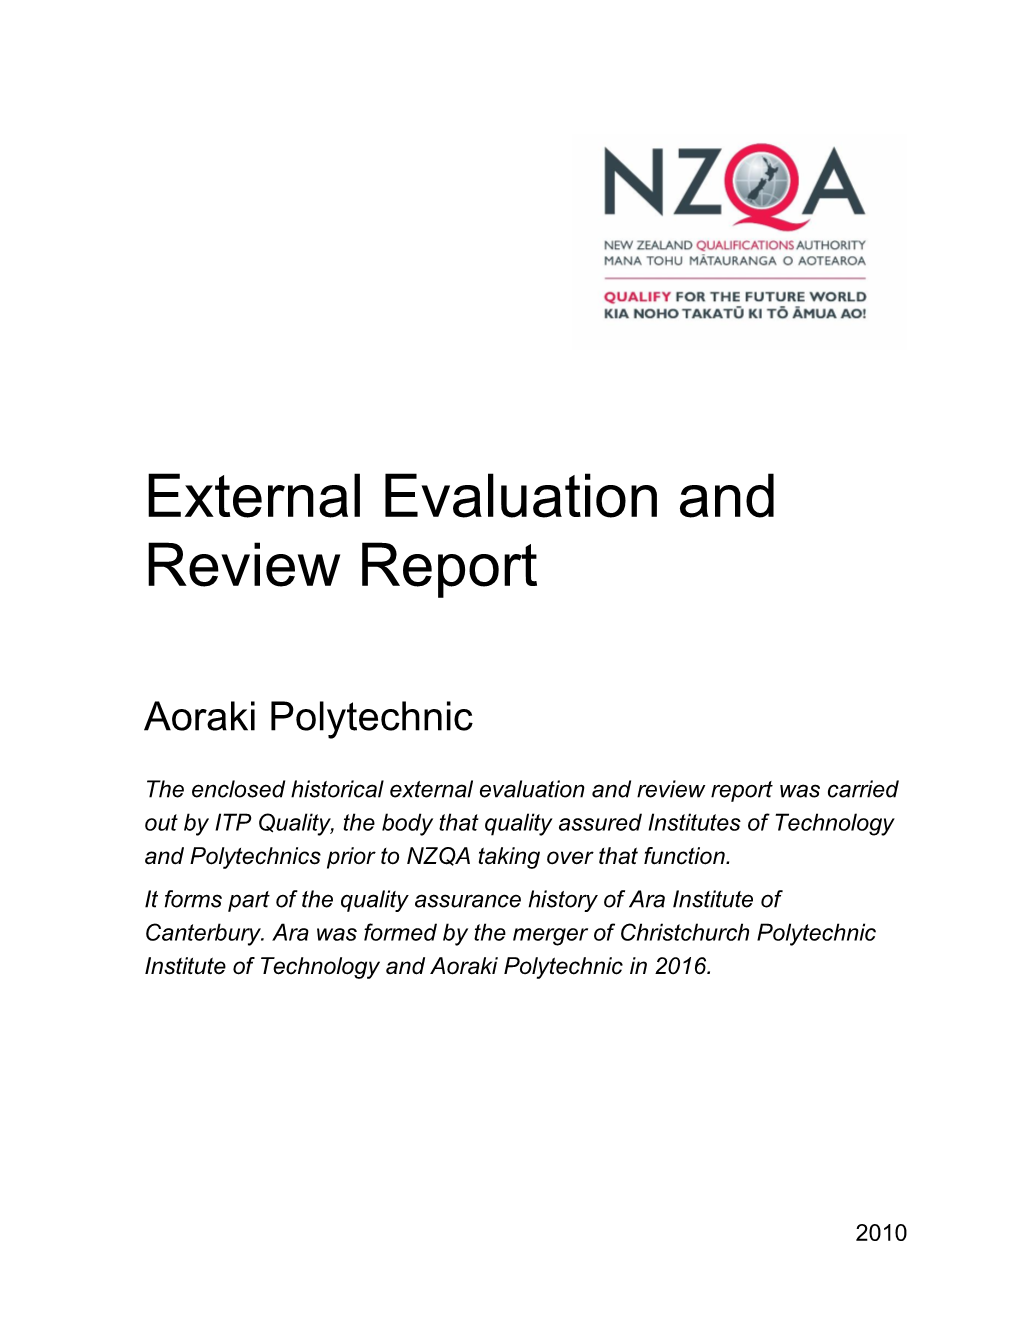 Report of External Evaluation and Review Aoraki Polytechnic